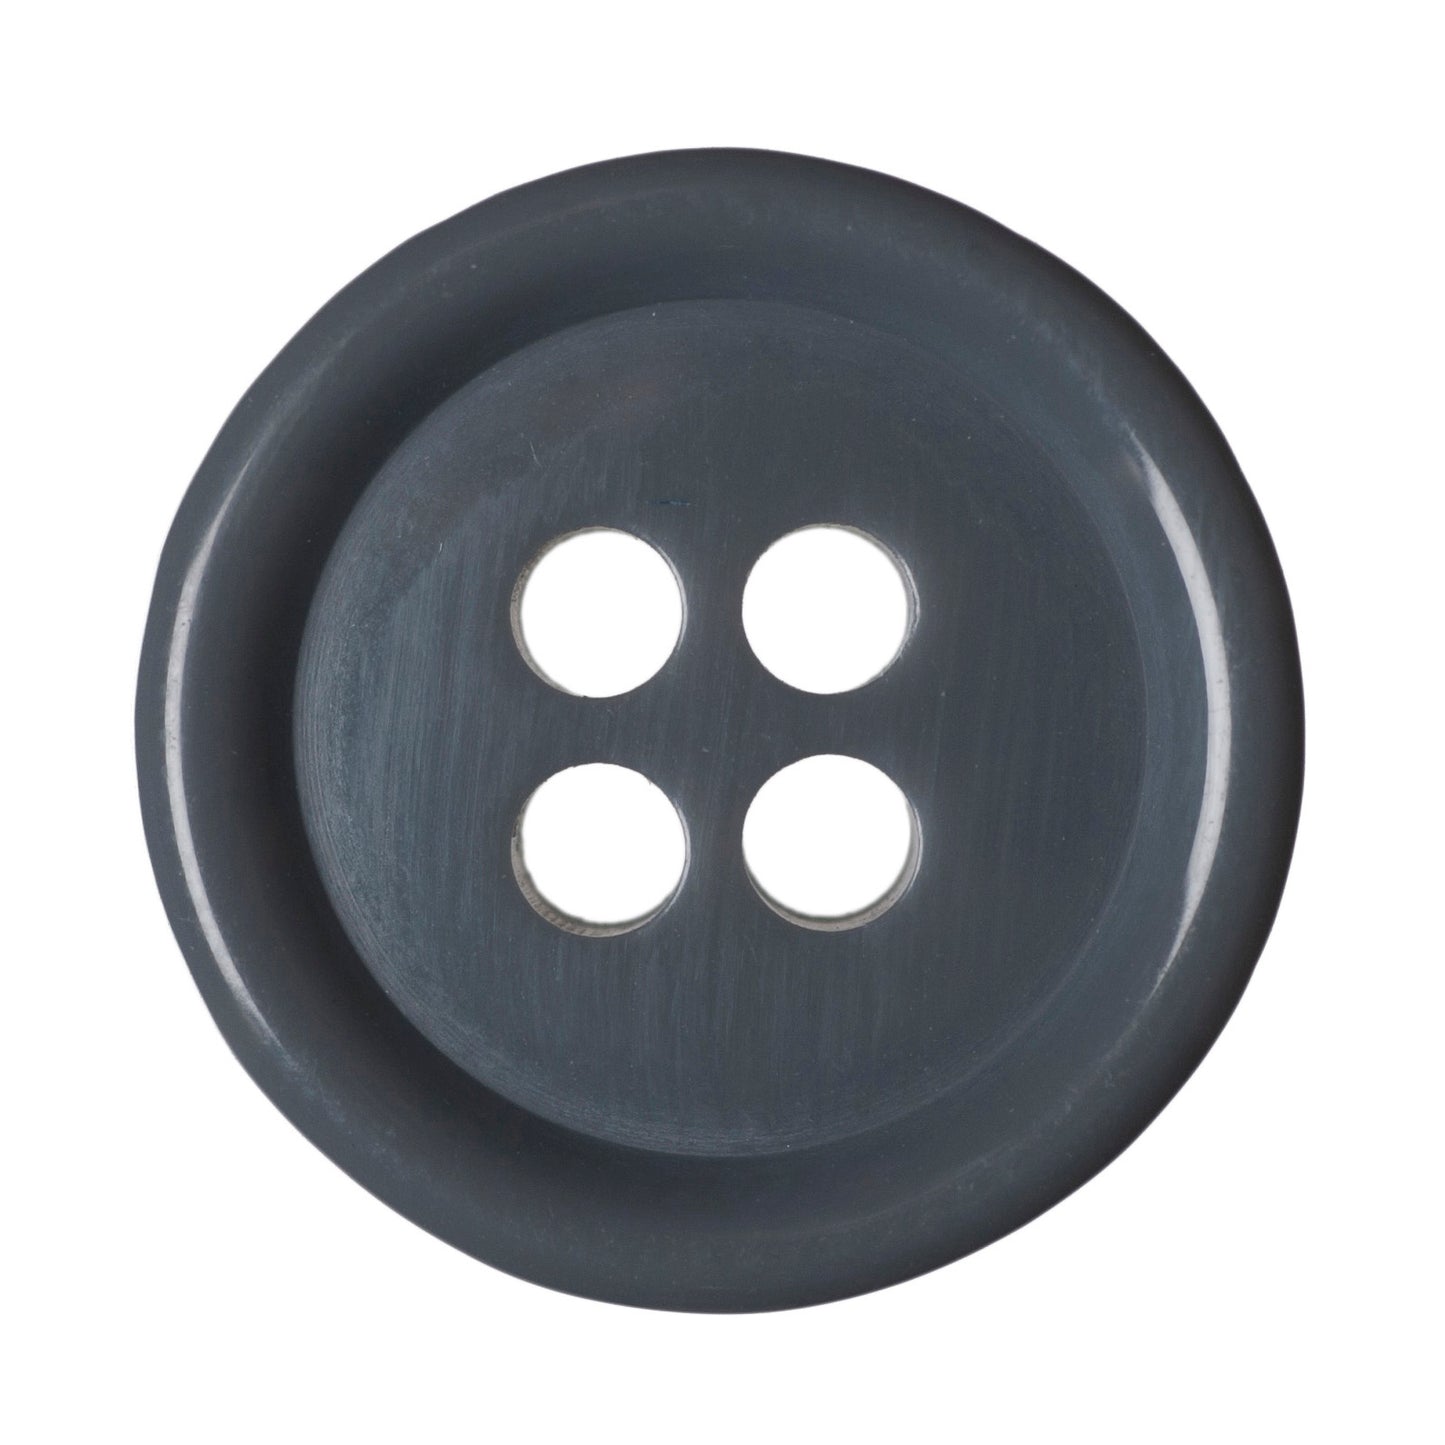 4 Hole Solid Jacket Button - 15mm - Grey